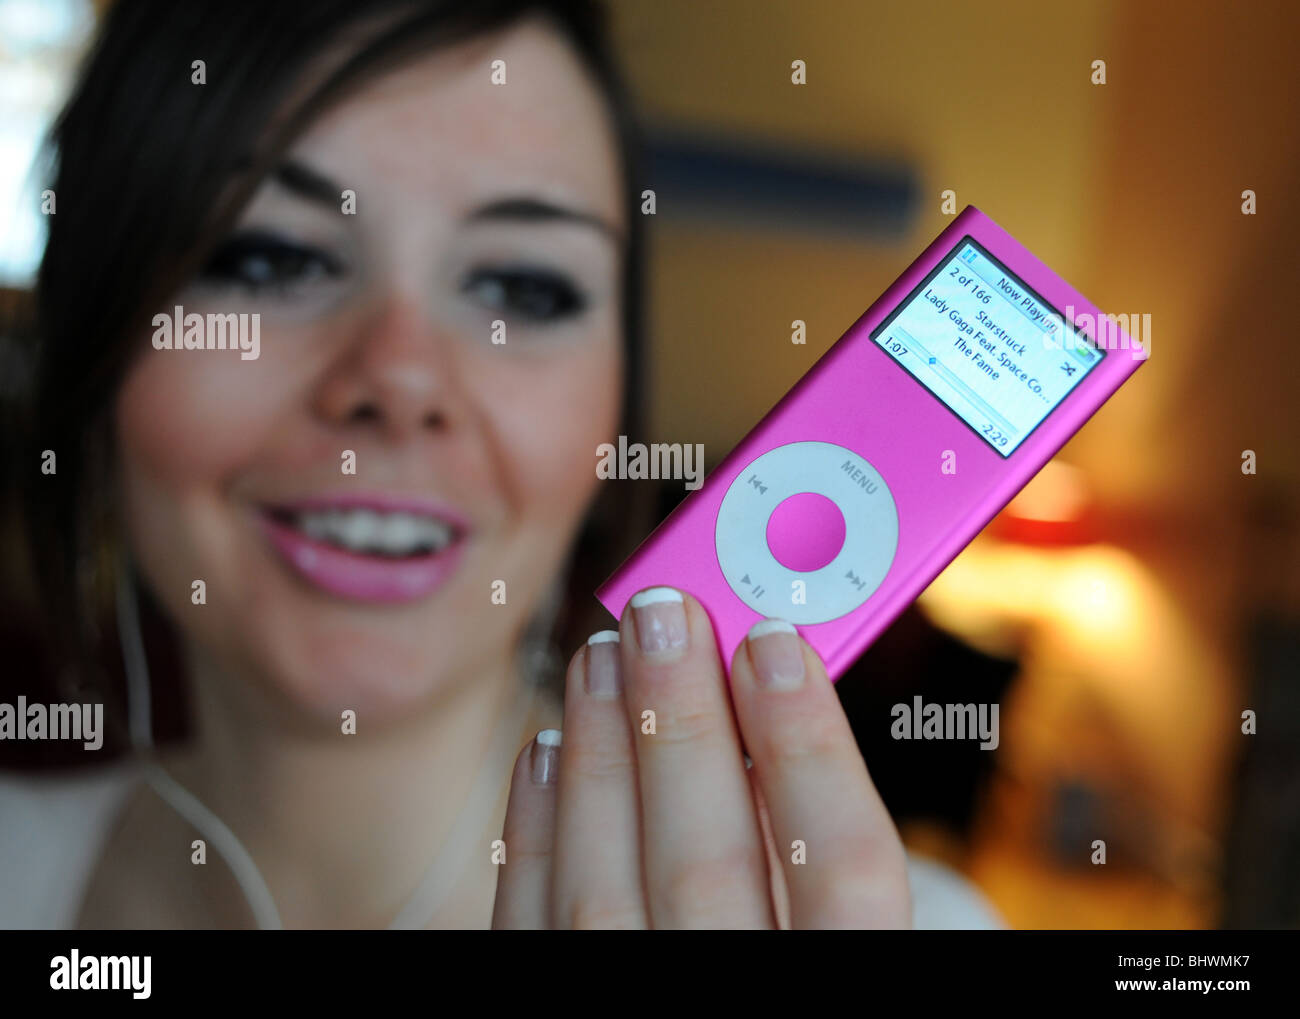 Young woman relaxing at home listening to music on an Apple pink iPod nano storage device Stock Photo